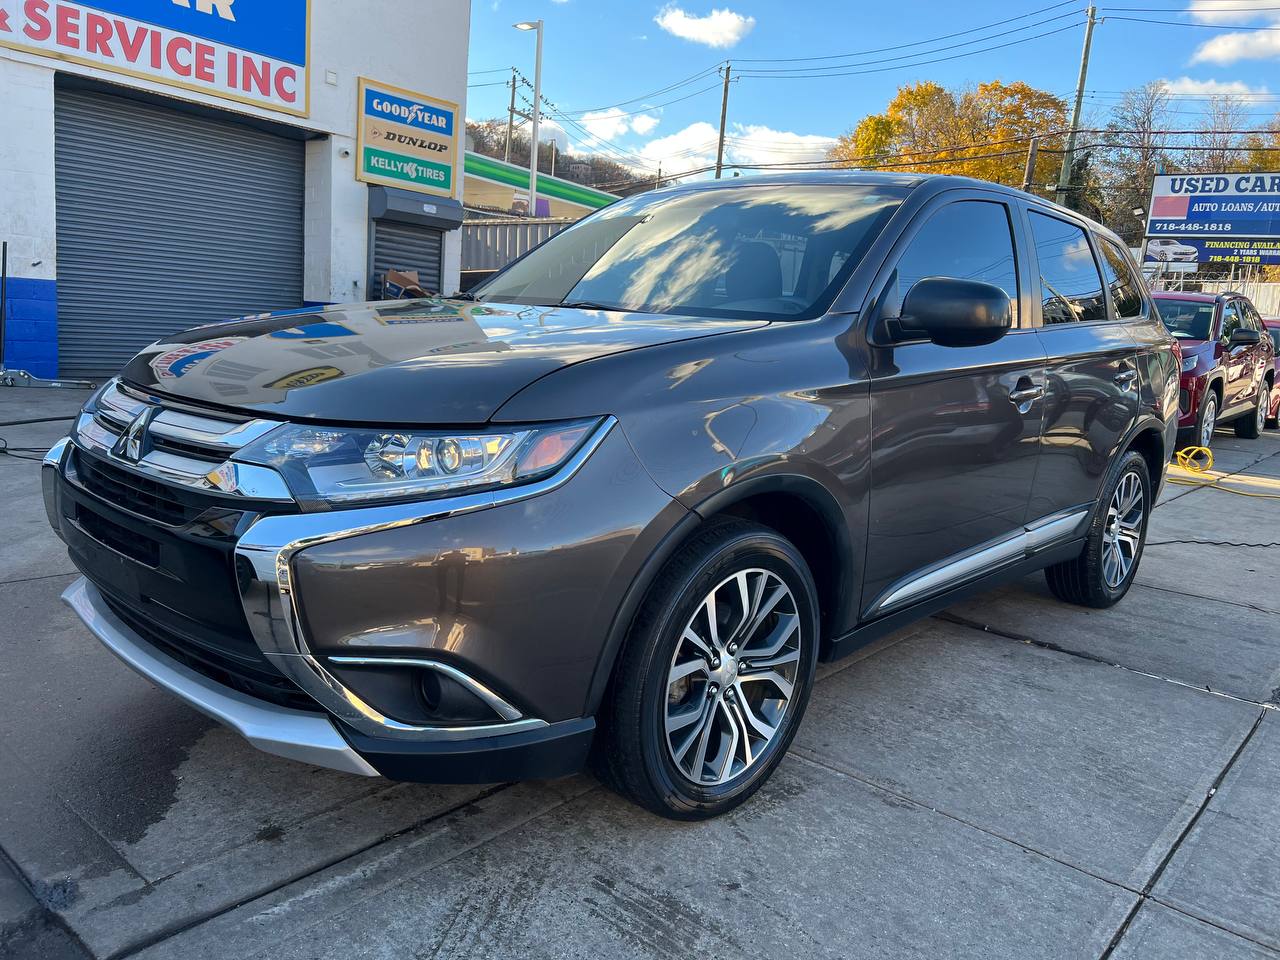 Used Car - 2018 Mitsubishi Outlander ES for Sale in Staten Island, NY